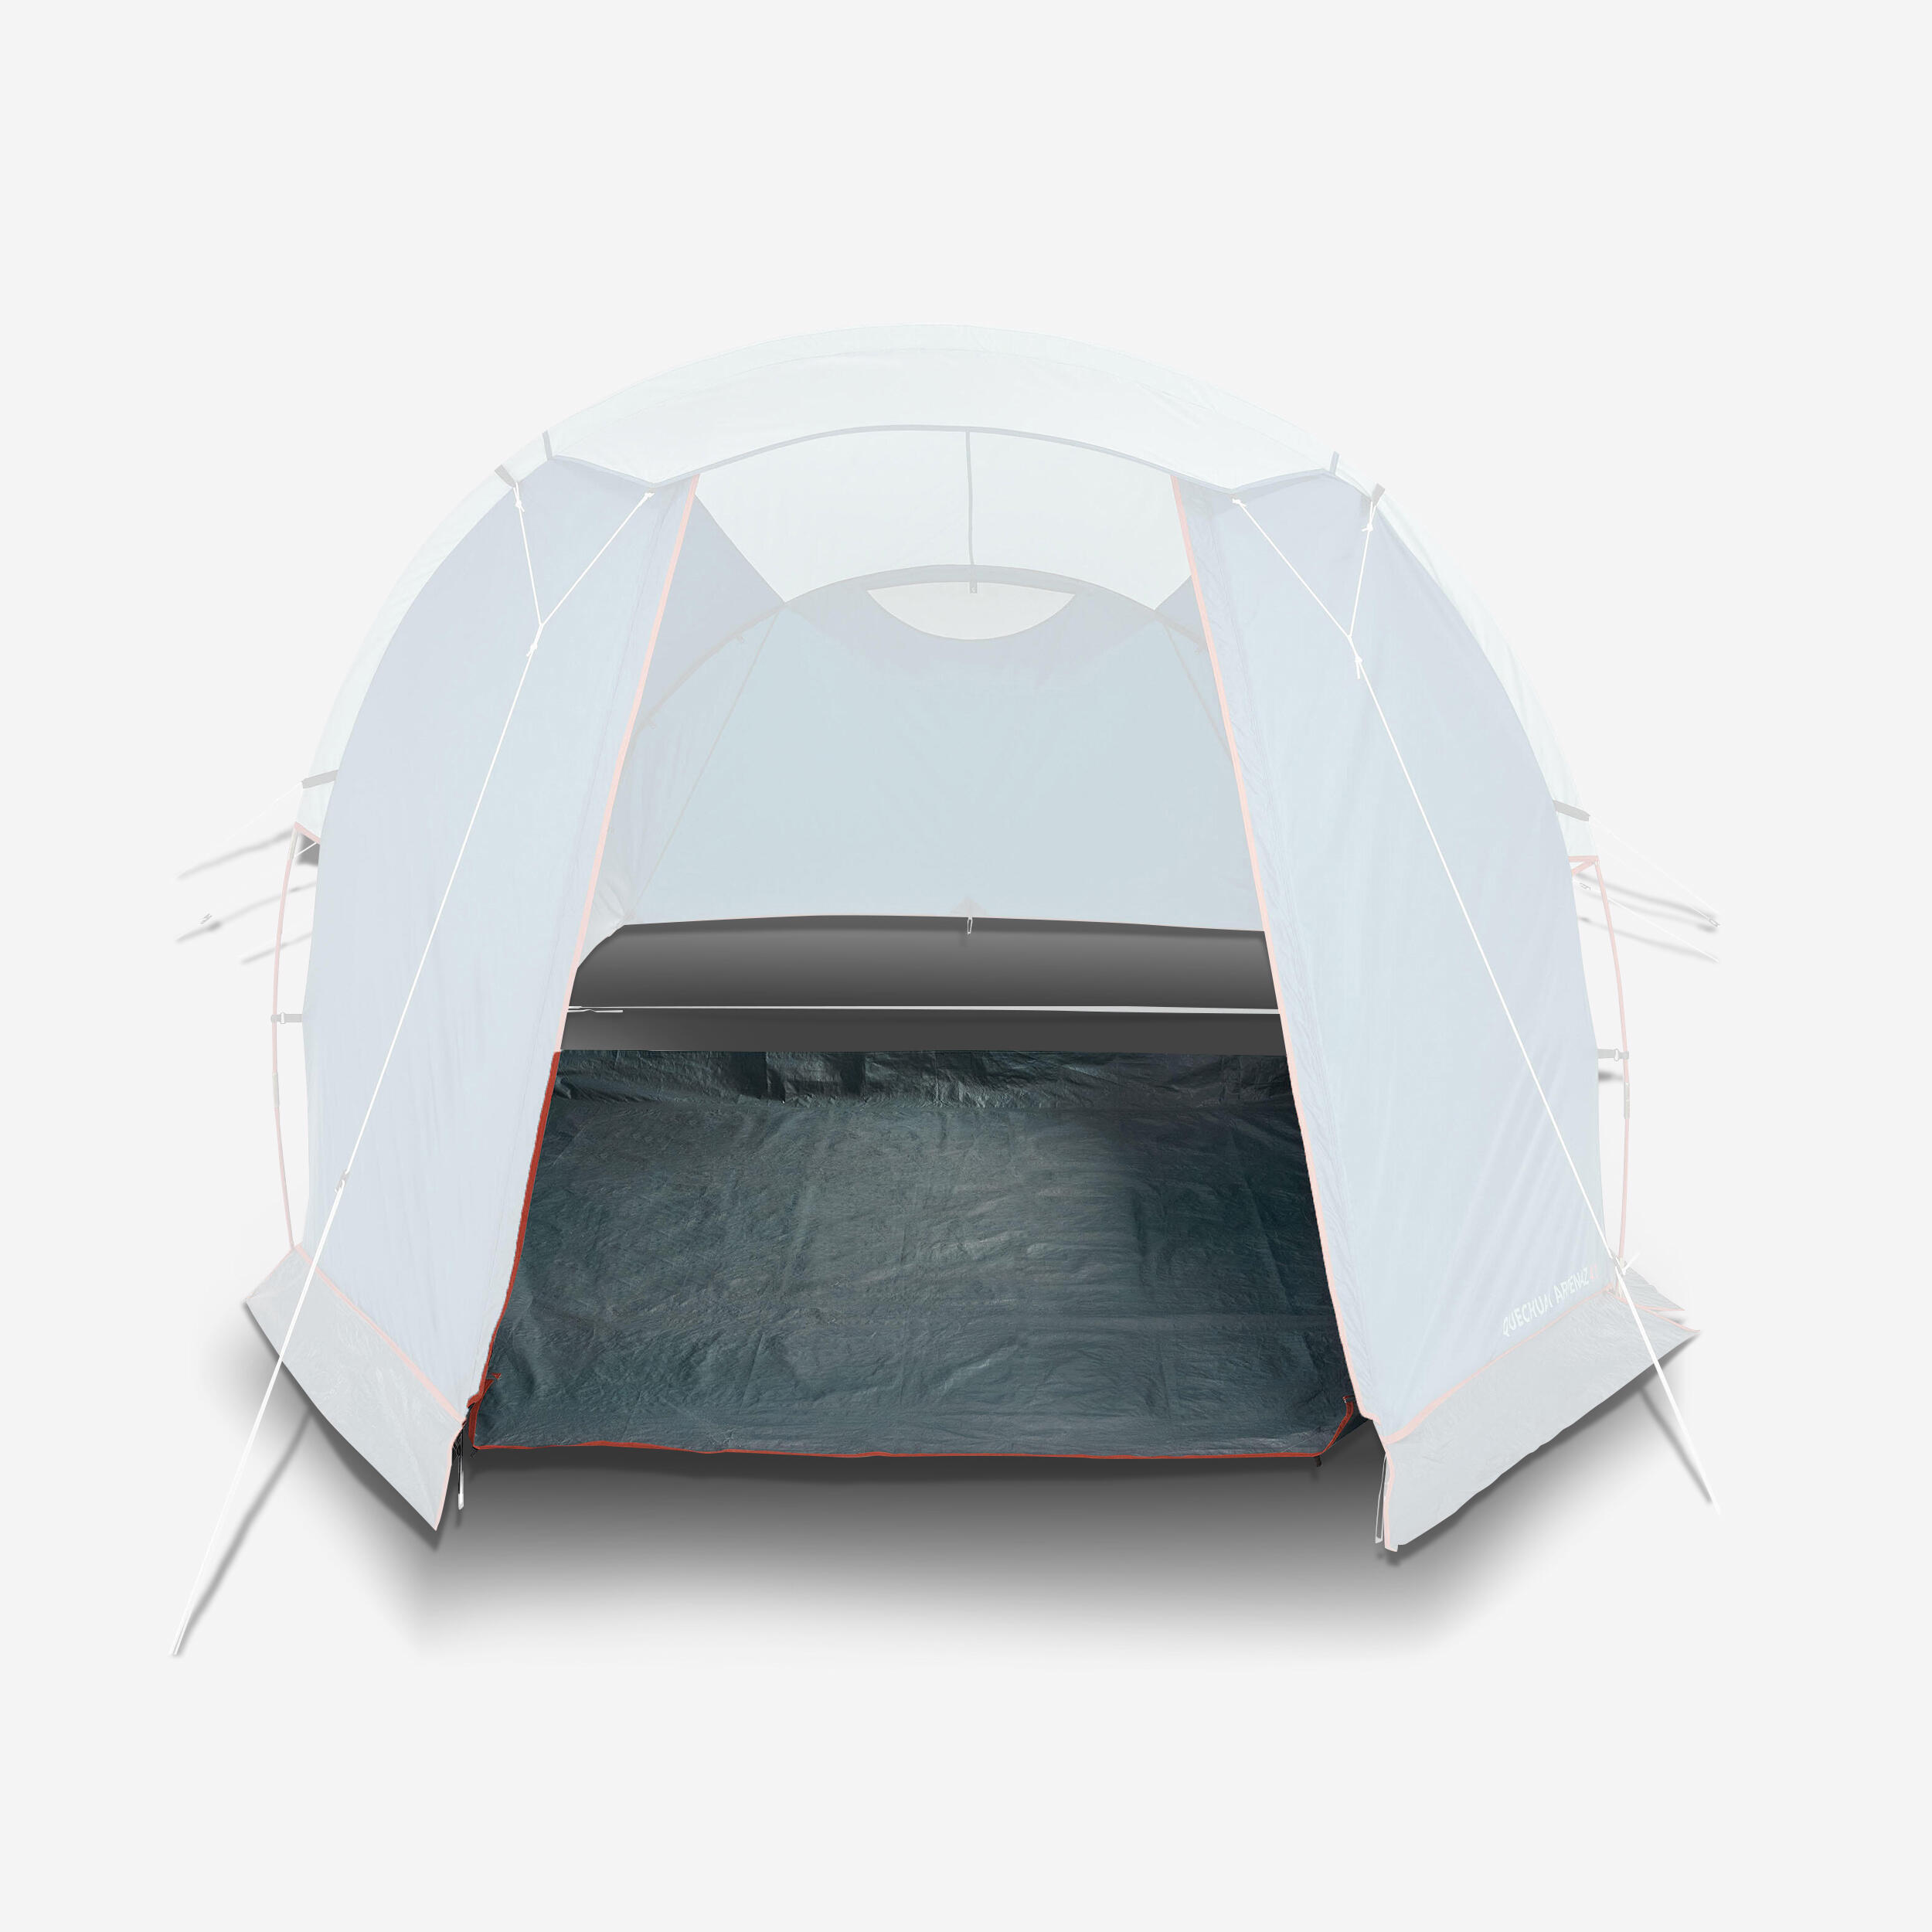 GROUNDSHEET - SPARE PART FOR ARPENAZ 4.1 TENT 1/1